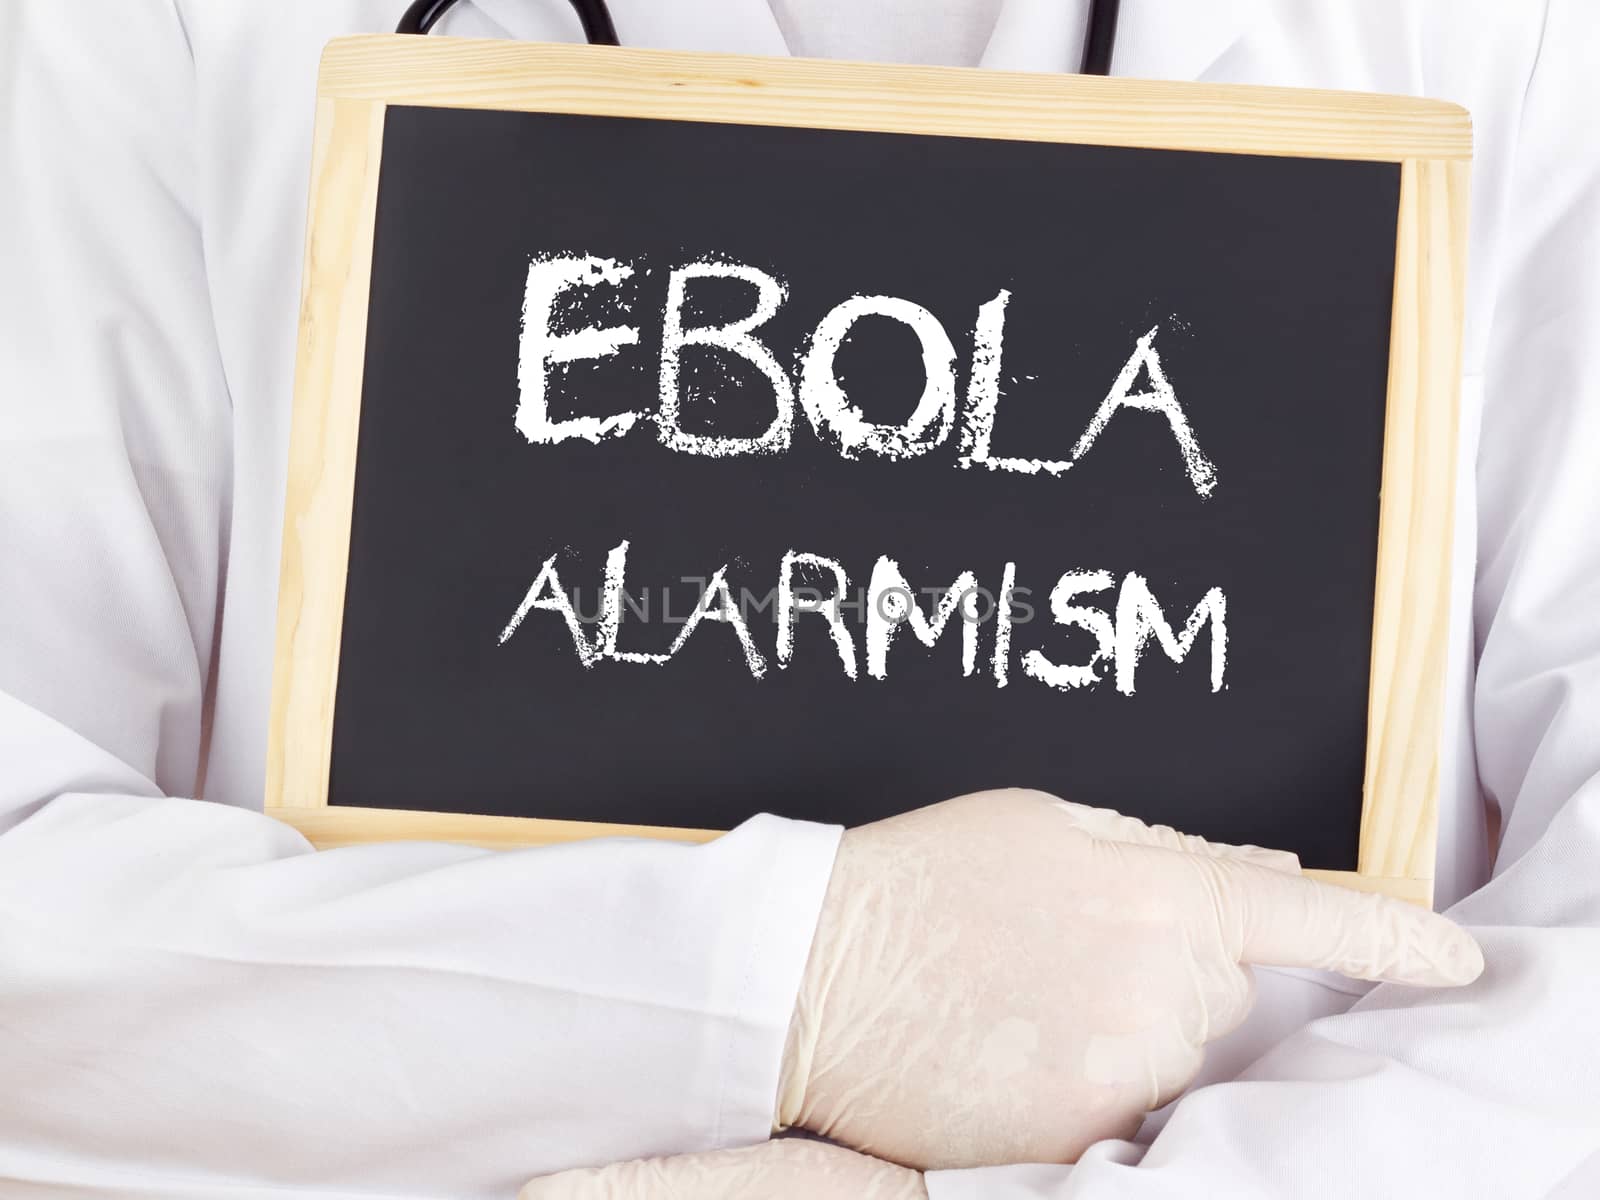 Doctor shows information: Ebola alarmism by gwolters